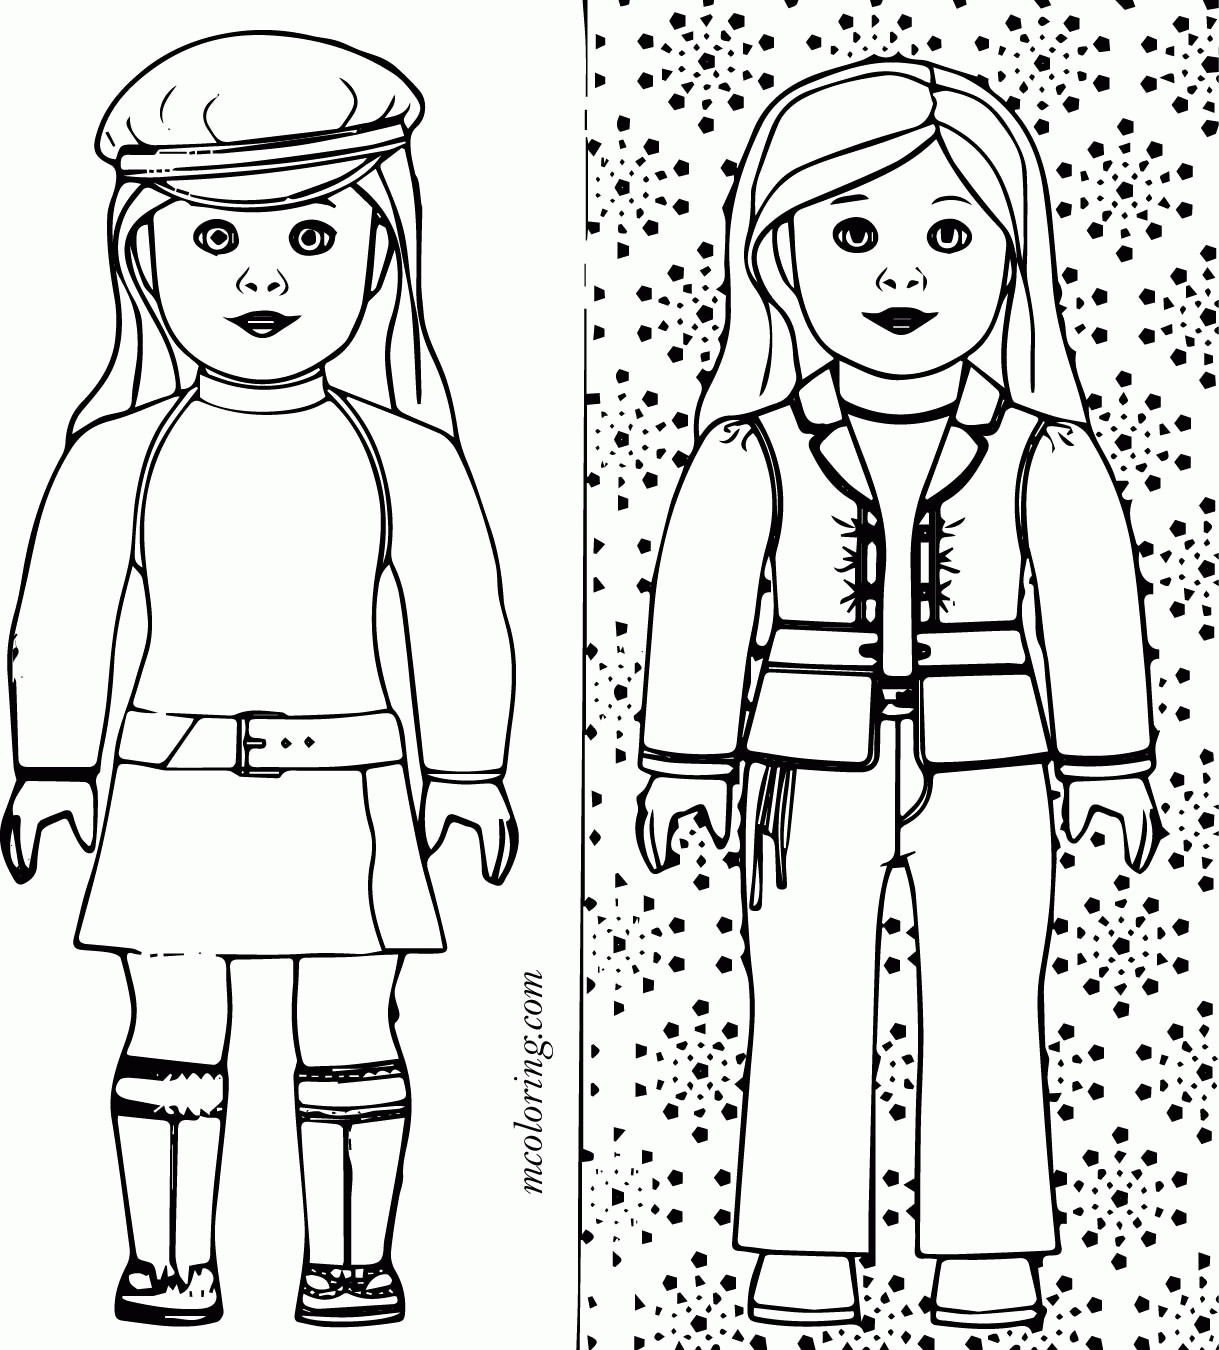 American Girl Doll Isabelle Coloring Pages
 Girl Holding Doll Coloring Pages AZ Coloring Pages